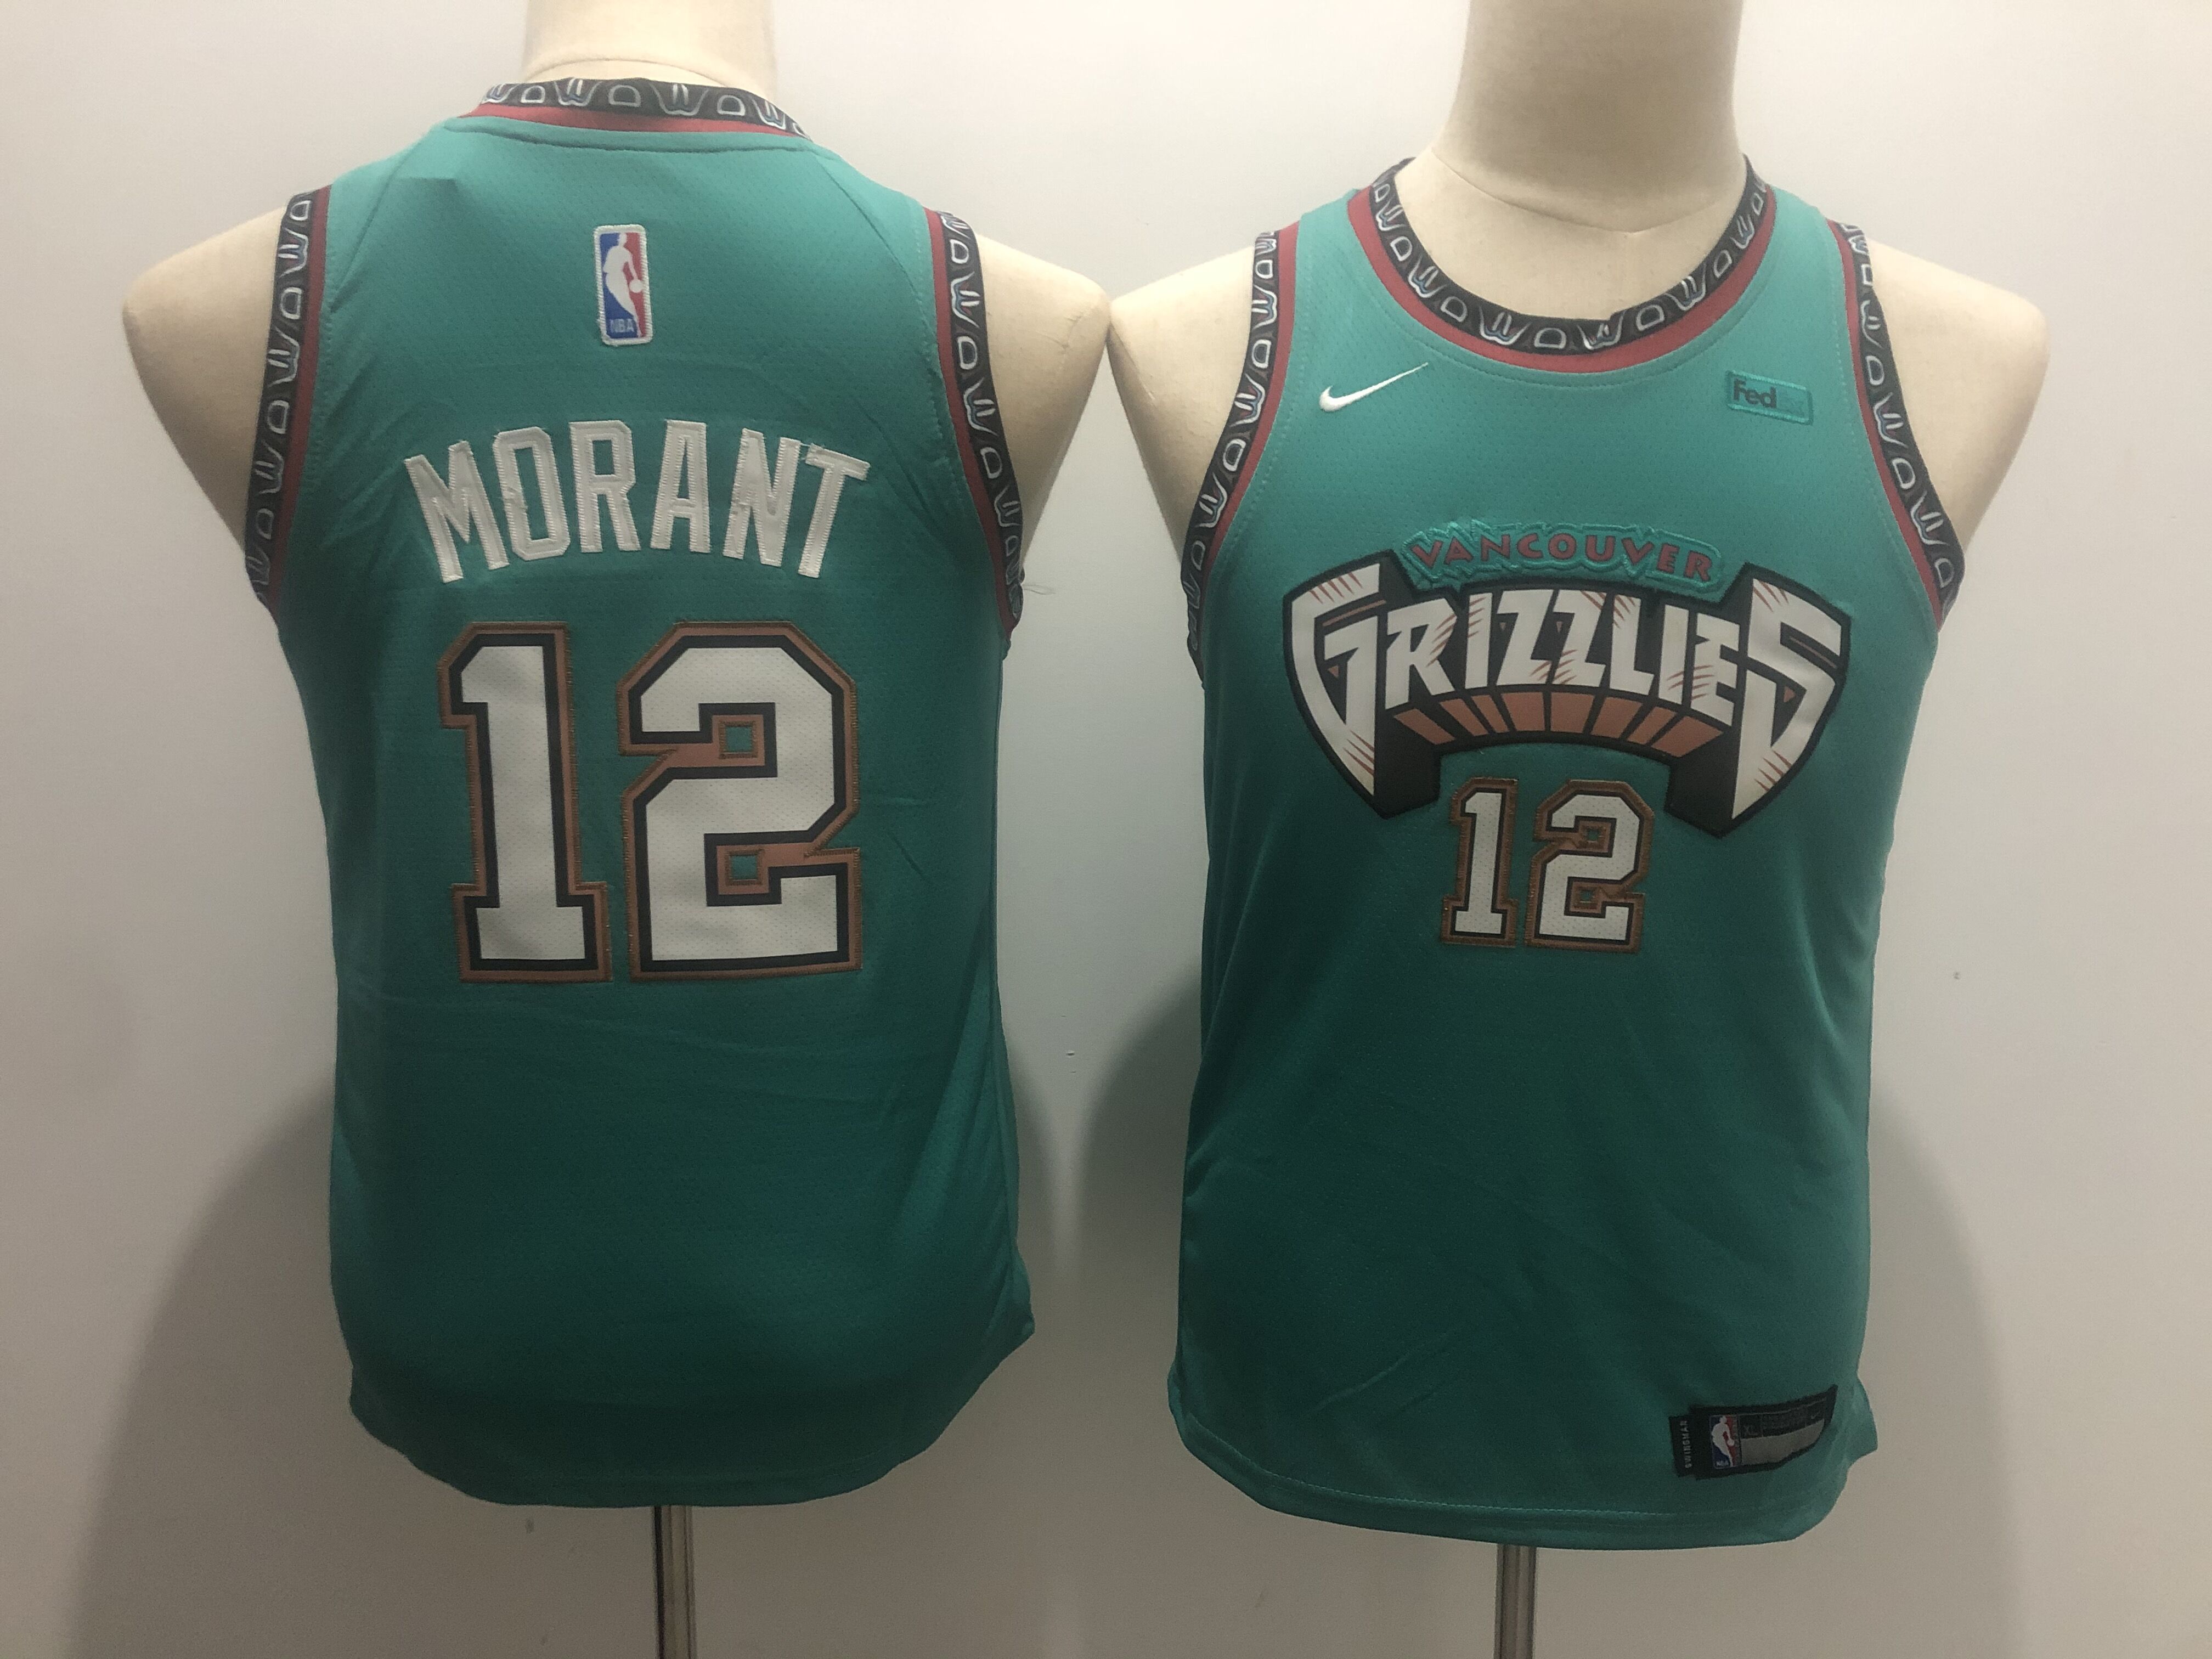 Youth Memphis Grizzlies #12 Morant green Nike NBA Jerseys->los angeles chargers->NFL Jersey